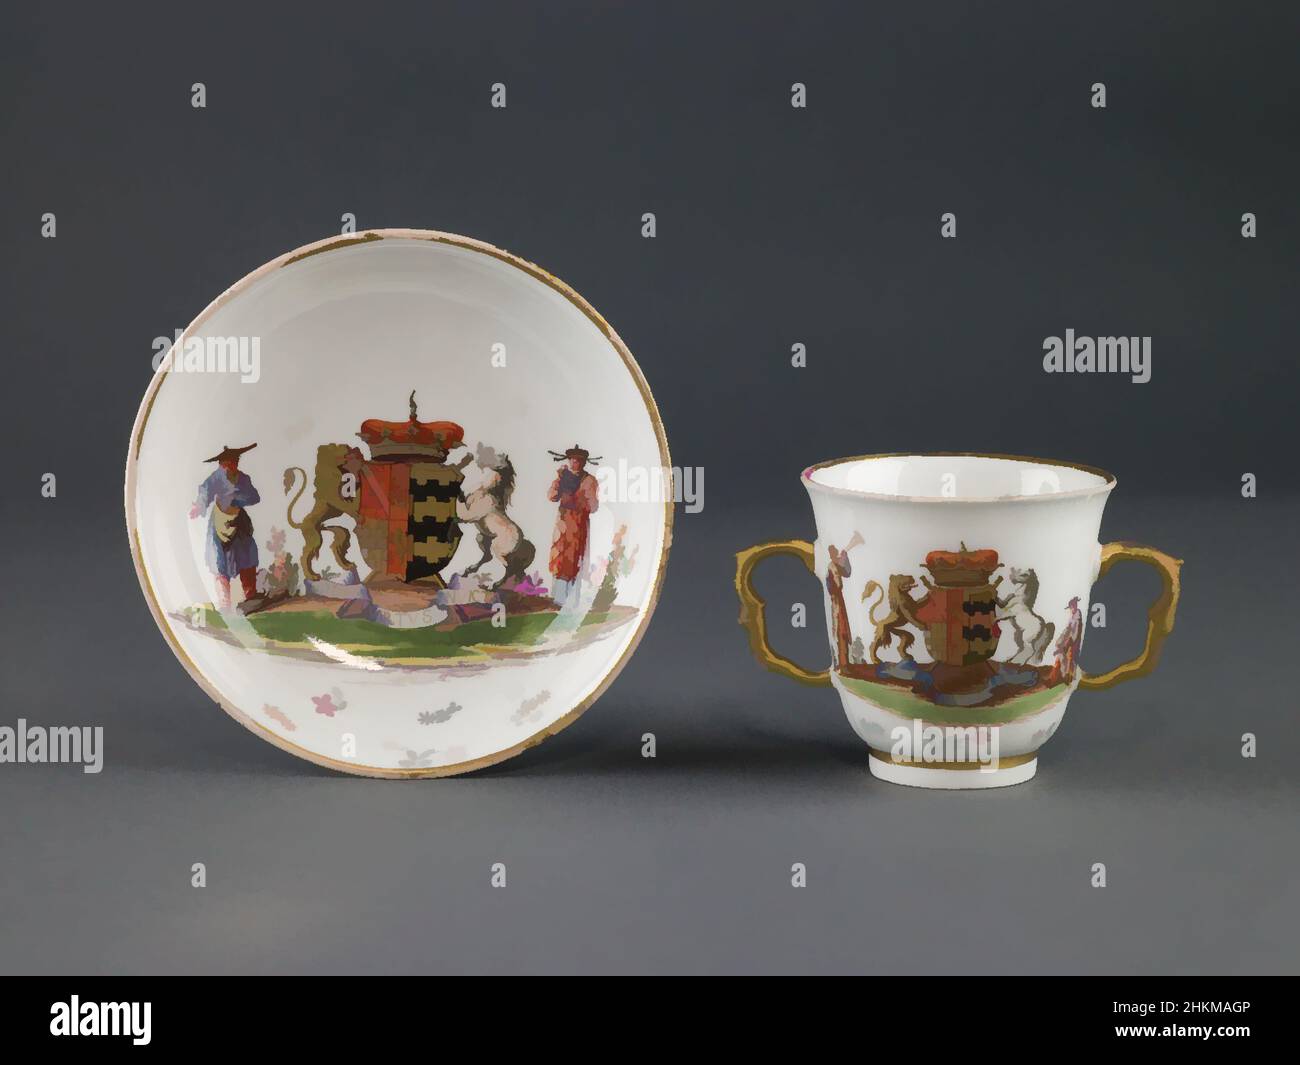 https://c8.alamy.com/comp/2HKMAGP/art-inspired-by-two-handled-cup-and-saucer-attributed-to-johann-gregor-hroldt-german-1696-1775-meissen-porcelain-factory-germany-founded-1710-c1733-glazed-porcelain-with-enamel-decoration-and-gilding-made-in-meissen-germany-europe-ceramics-cup-2-58-x-4-x-2-34-in-67-classic-works-modernized-by-artotop-with-a-splash-of-modernity-shapes-color-and-value-eye-catching-visual-impact-on-art-emotions-through-freedom-of-artworks-in-a-contemporary-way-a-timeless-message-pursuing-a-wildly-creative-new-direction-artists-turning-to-the-digital-medium-and-creating-the-artotop-nft-2HKMAGP.jpg